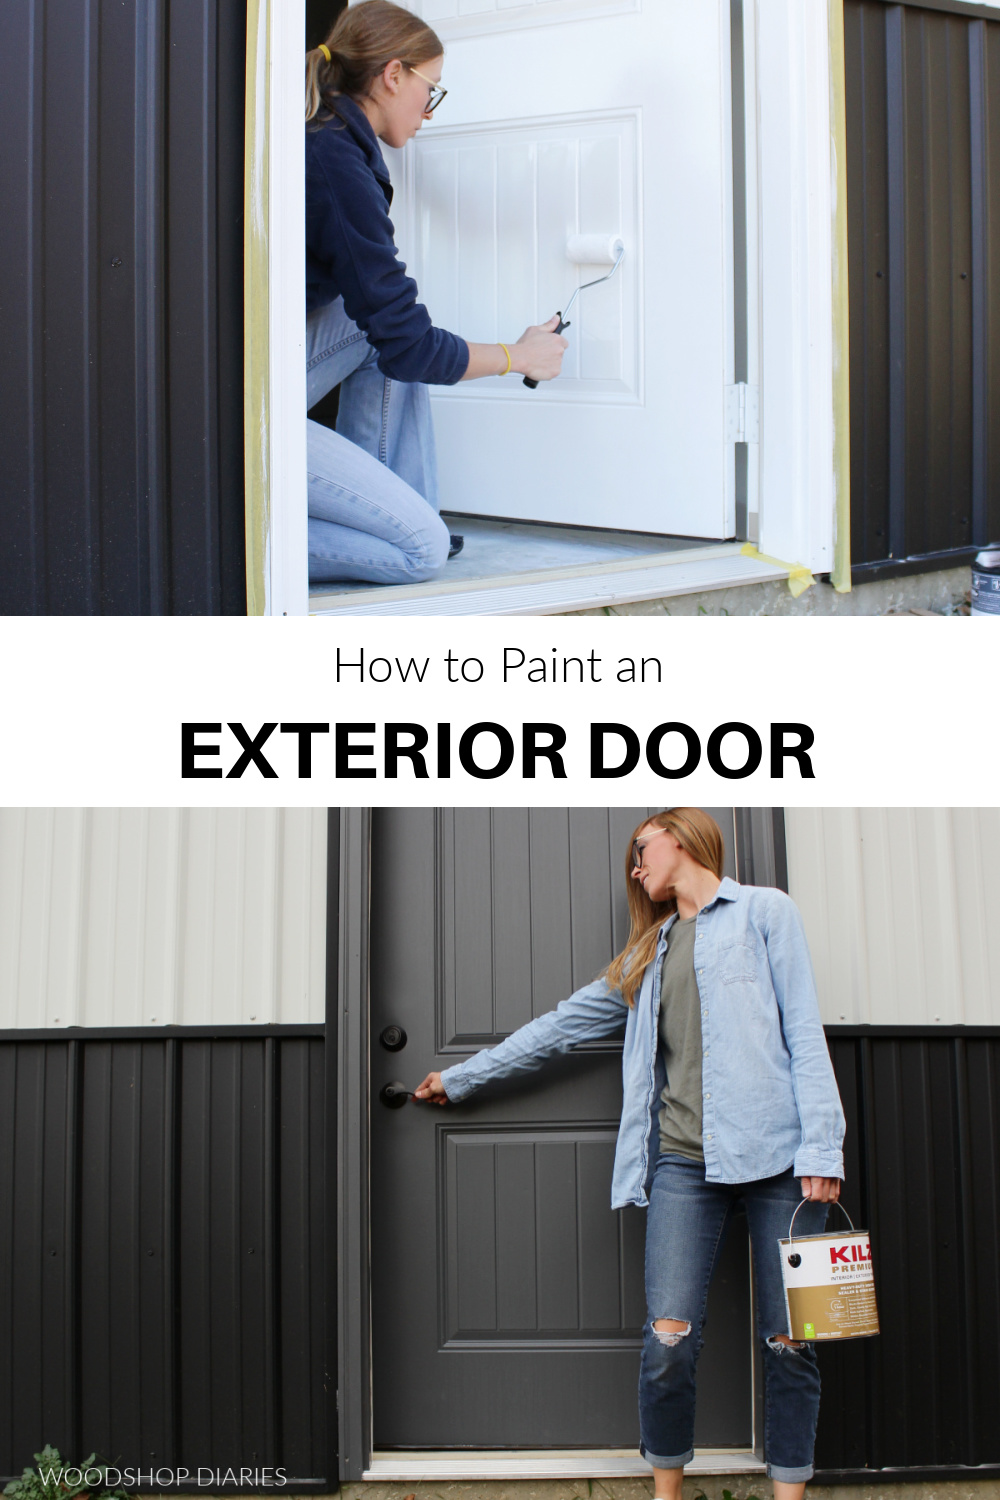 Pinterest collage showing Shara rolling primer onto door at top and standing against finished door at bottom with text "how to paint an exterior door"